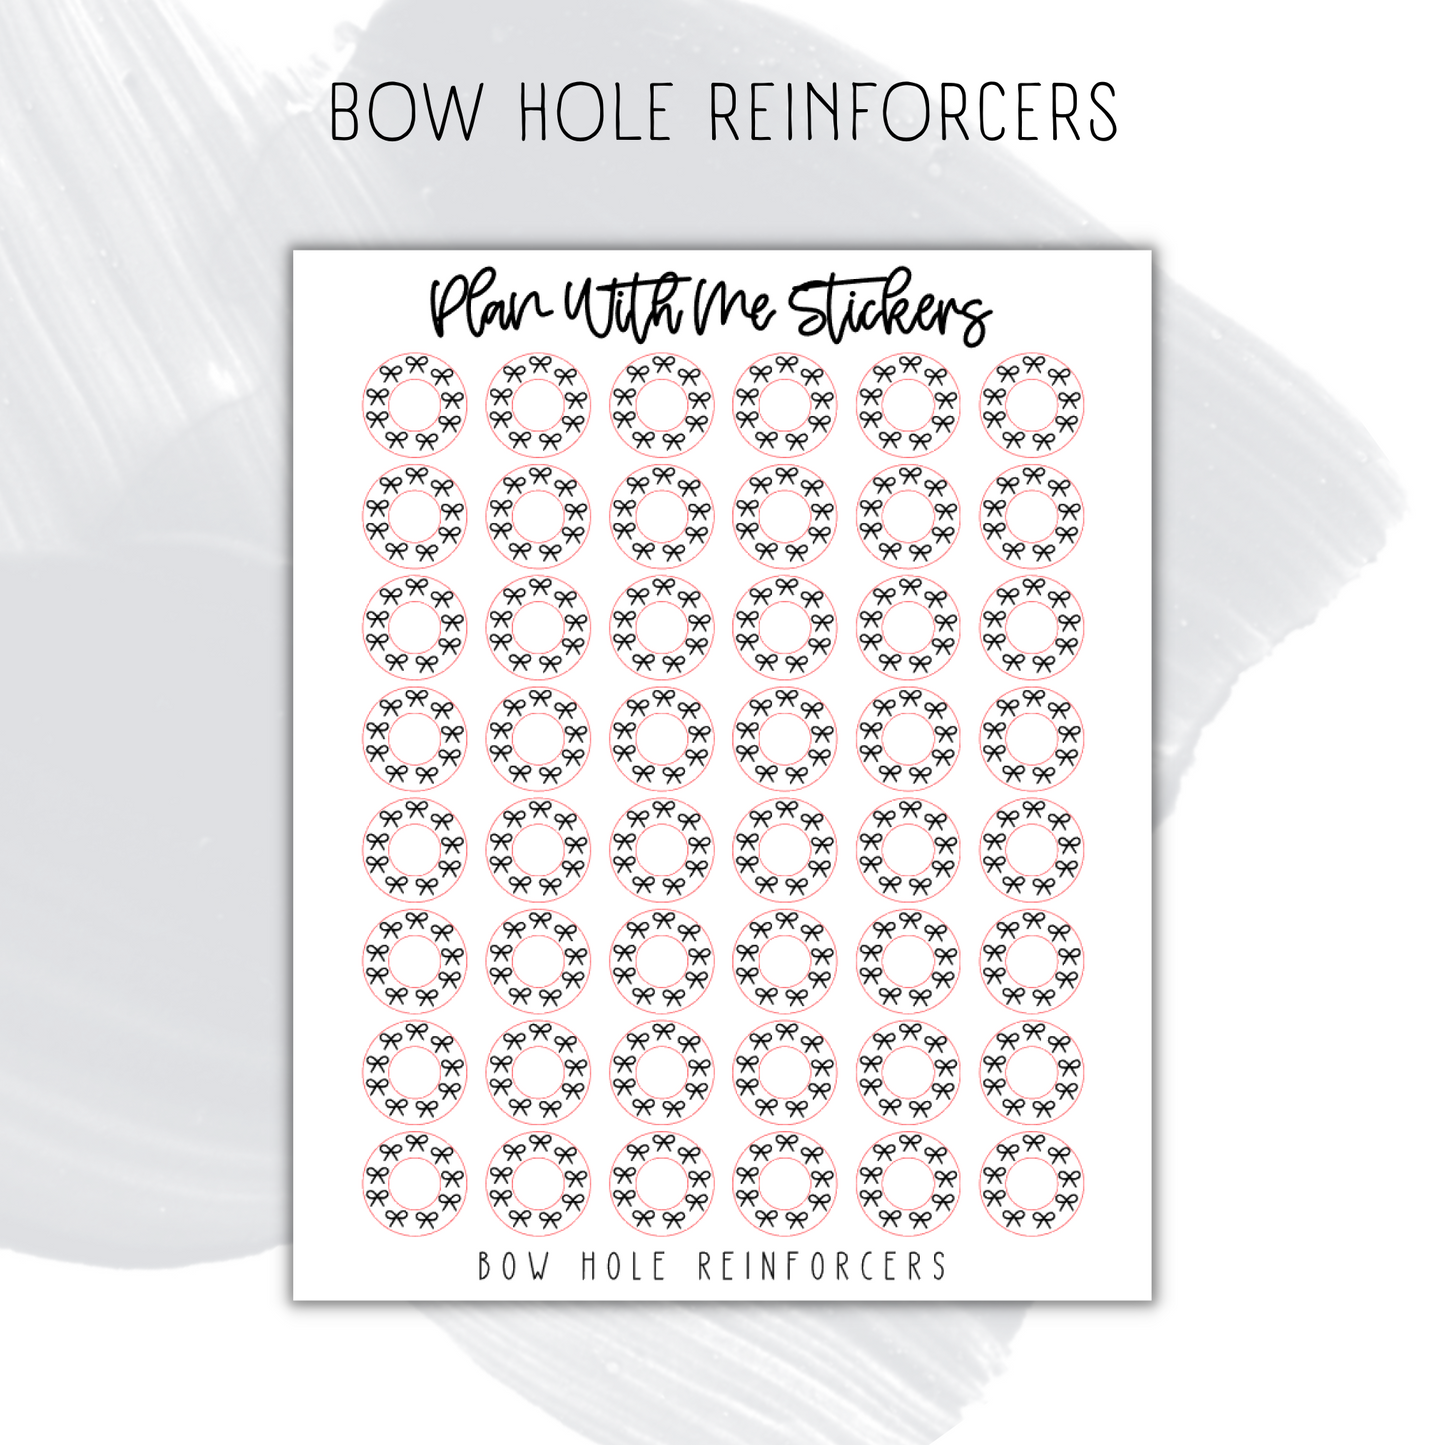 Bow Hole Reinforcers